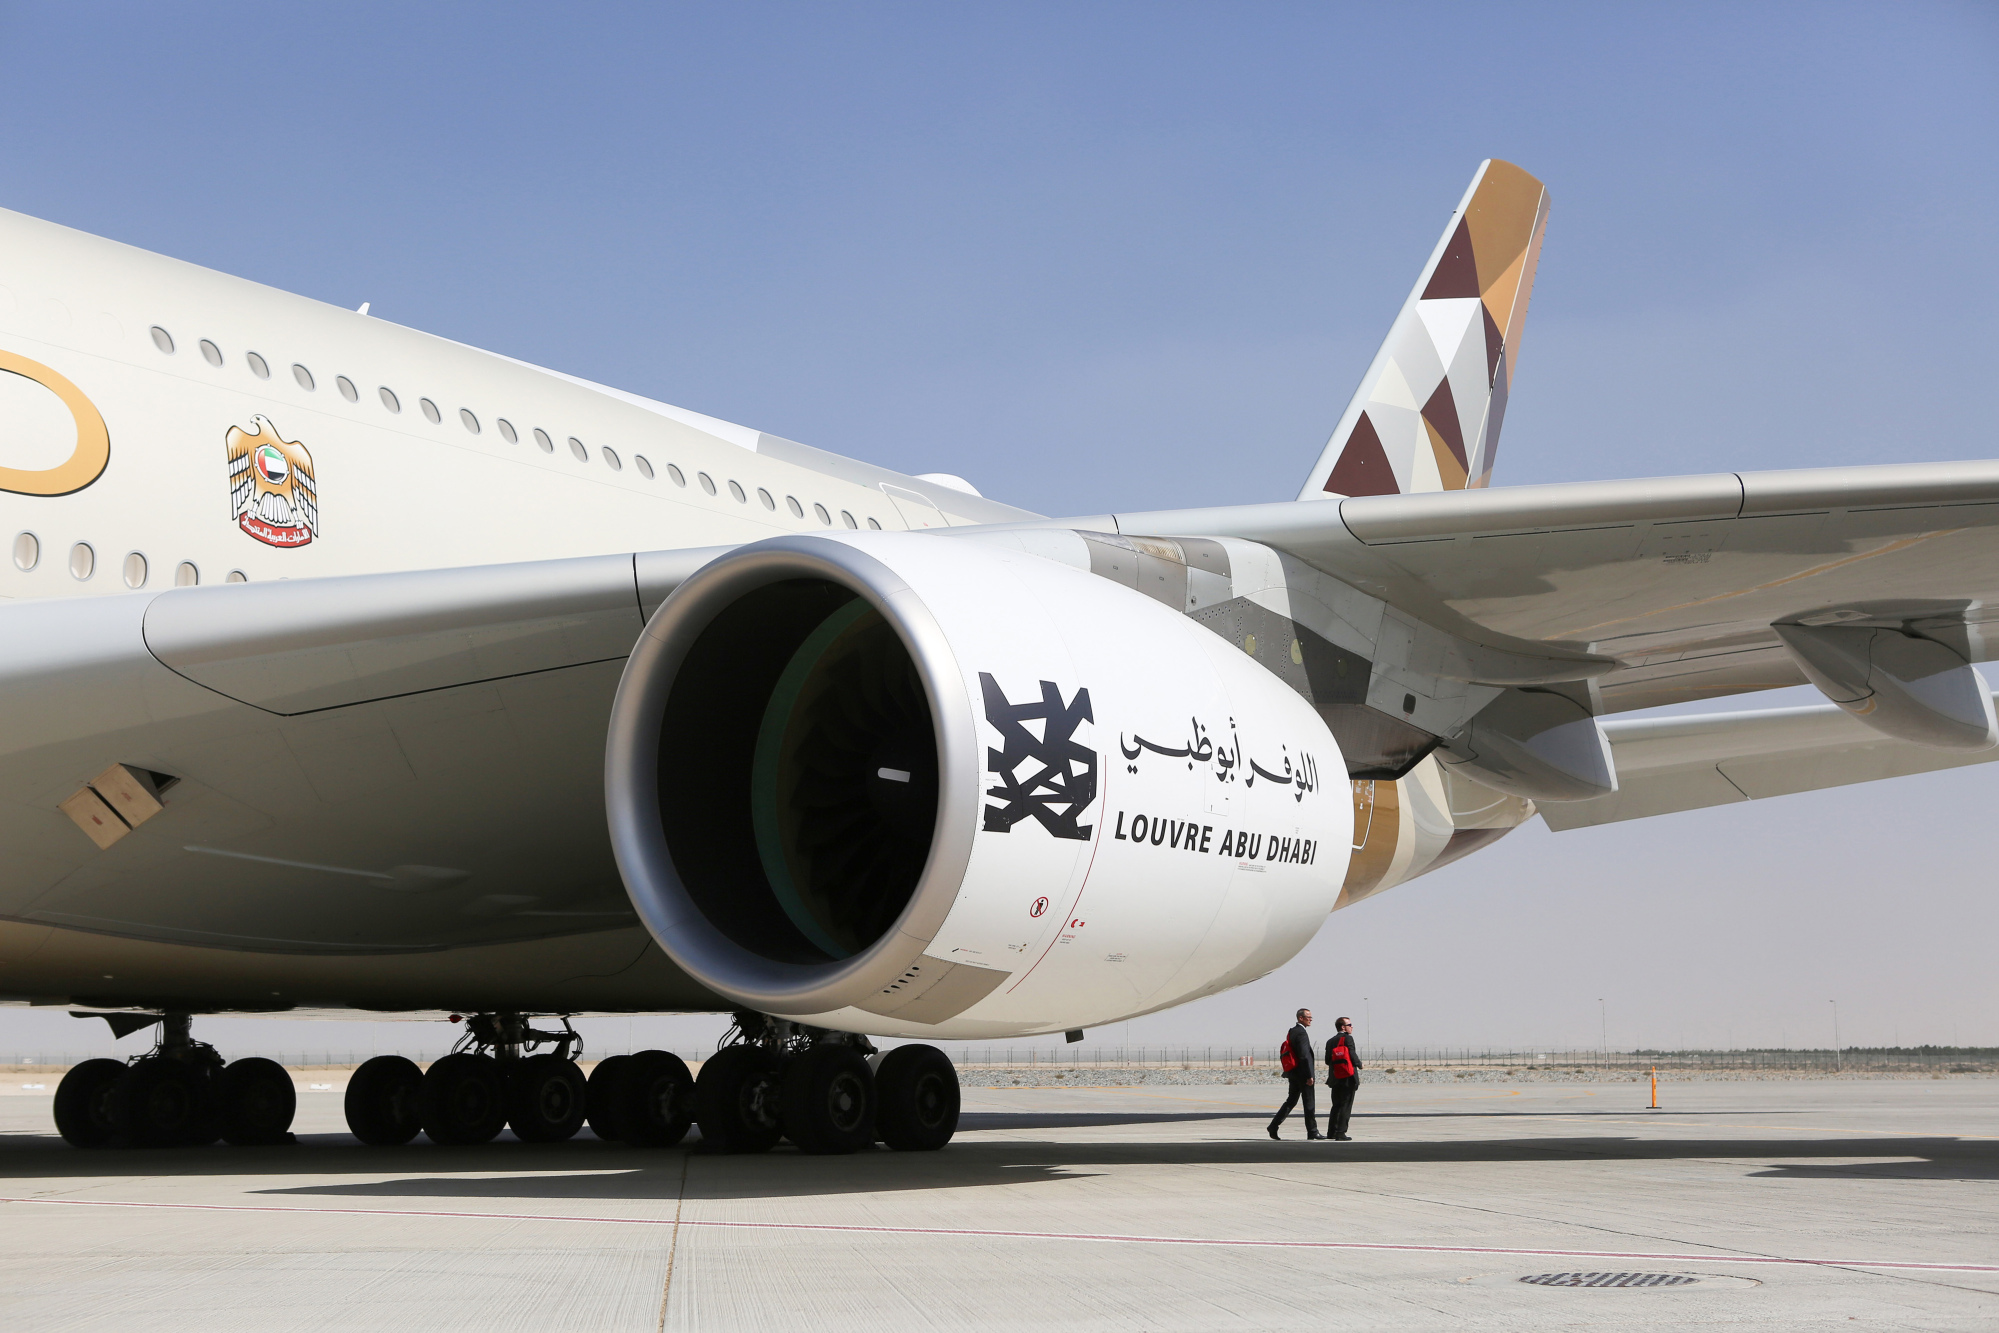 Attendees walk passed an Airbus SE A380 passenger aircraft, operated by Etihad Airways PJSC, as it stands on the tarmac during the 15th Dubai Air Show at Dubai World Central (DWC) in Dubai, United Arab Emirates.